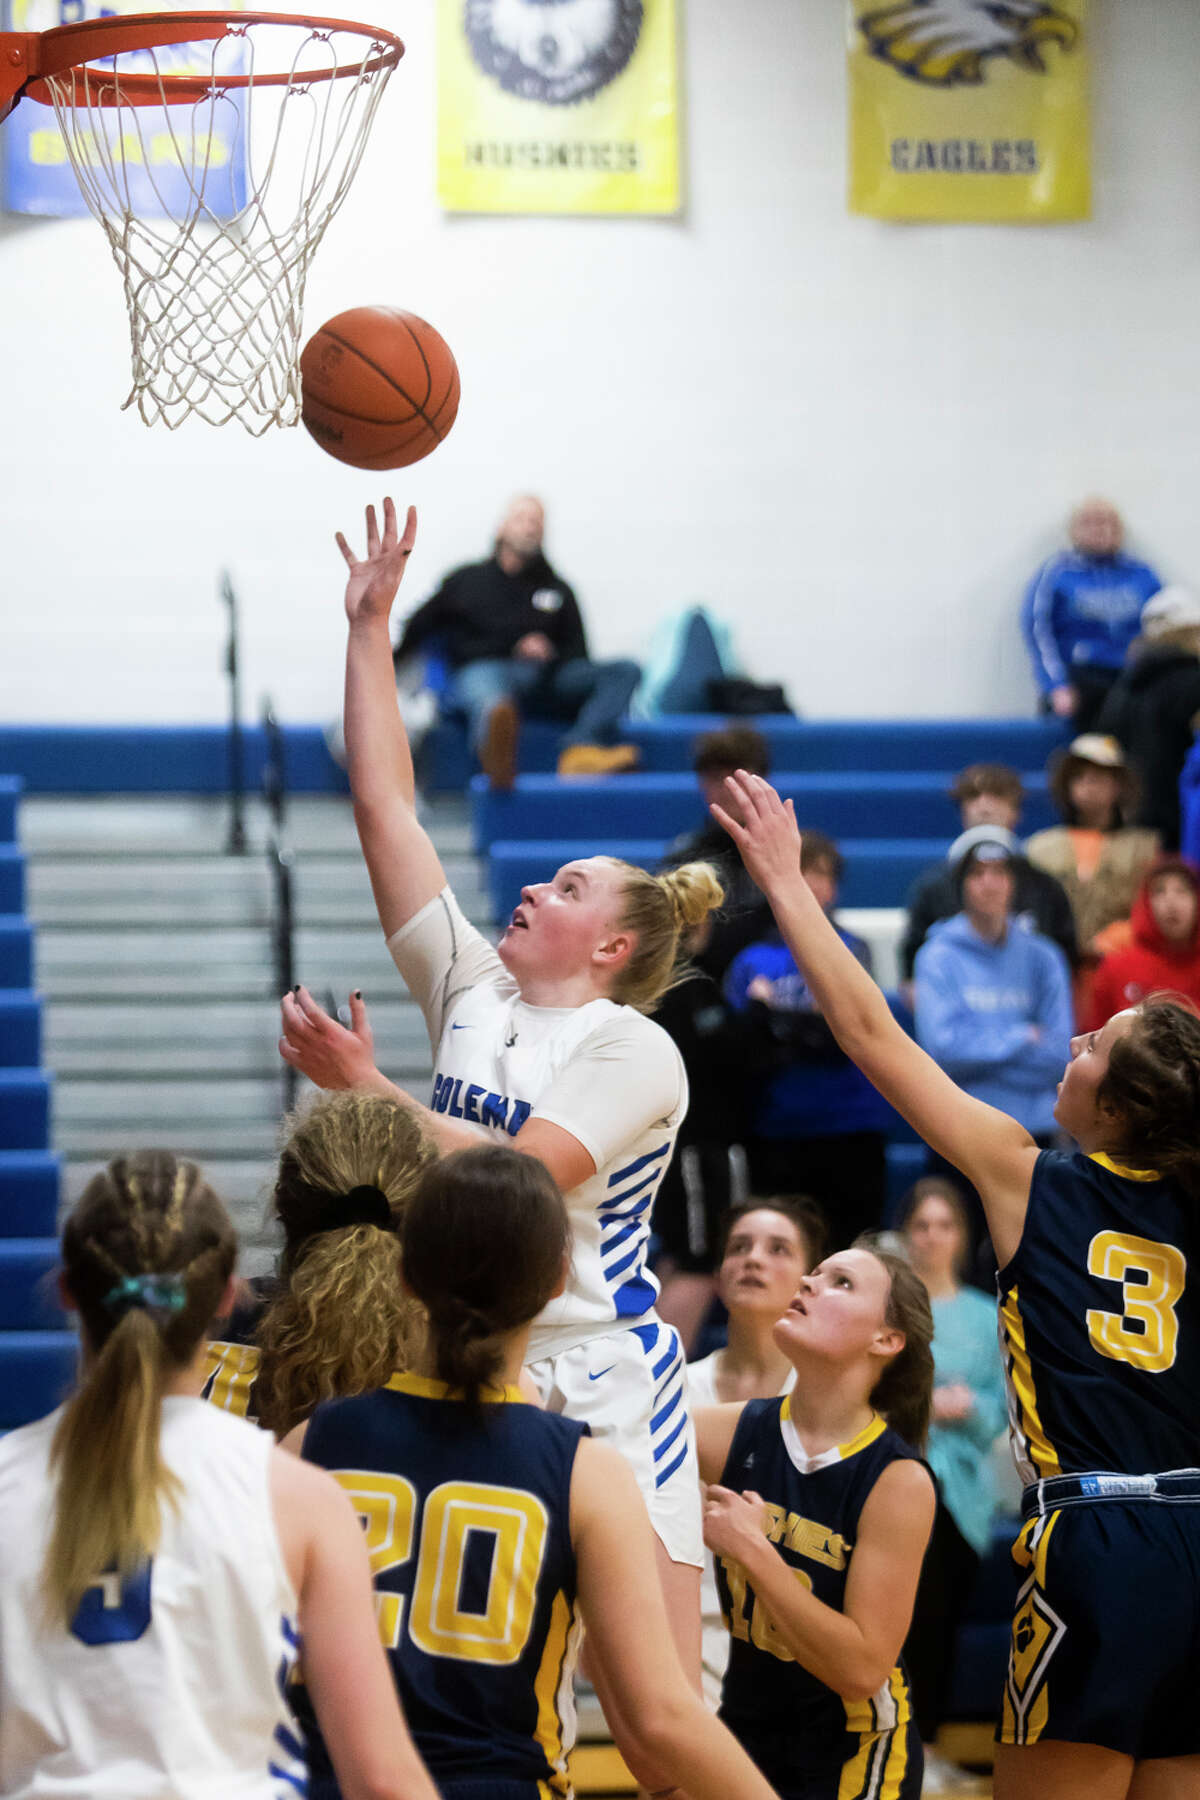 Coleman's Katelyn Pnacek takes a shot during the Comets' game against Breckenridge Thursday, Jan. 27, 2022 at Coleman High School.